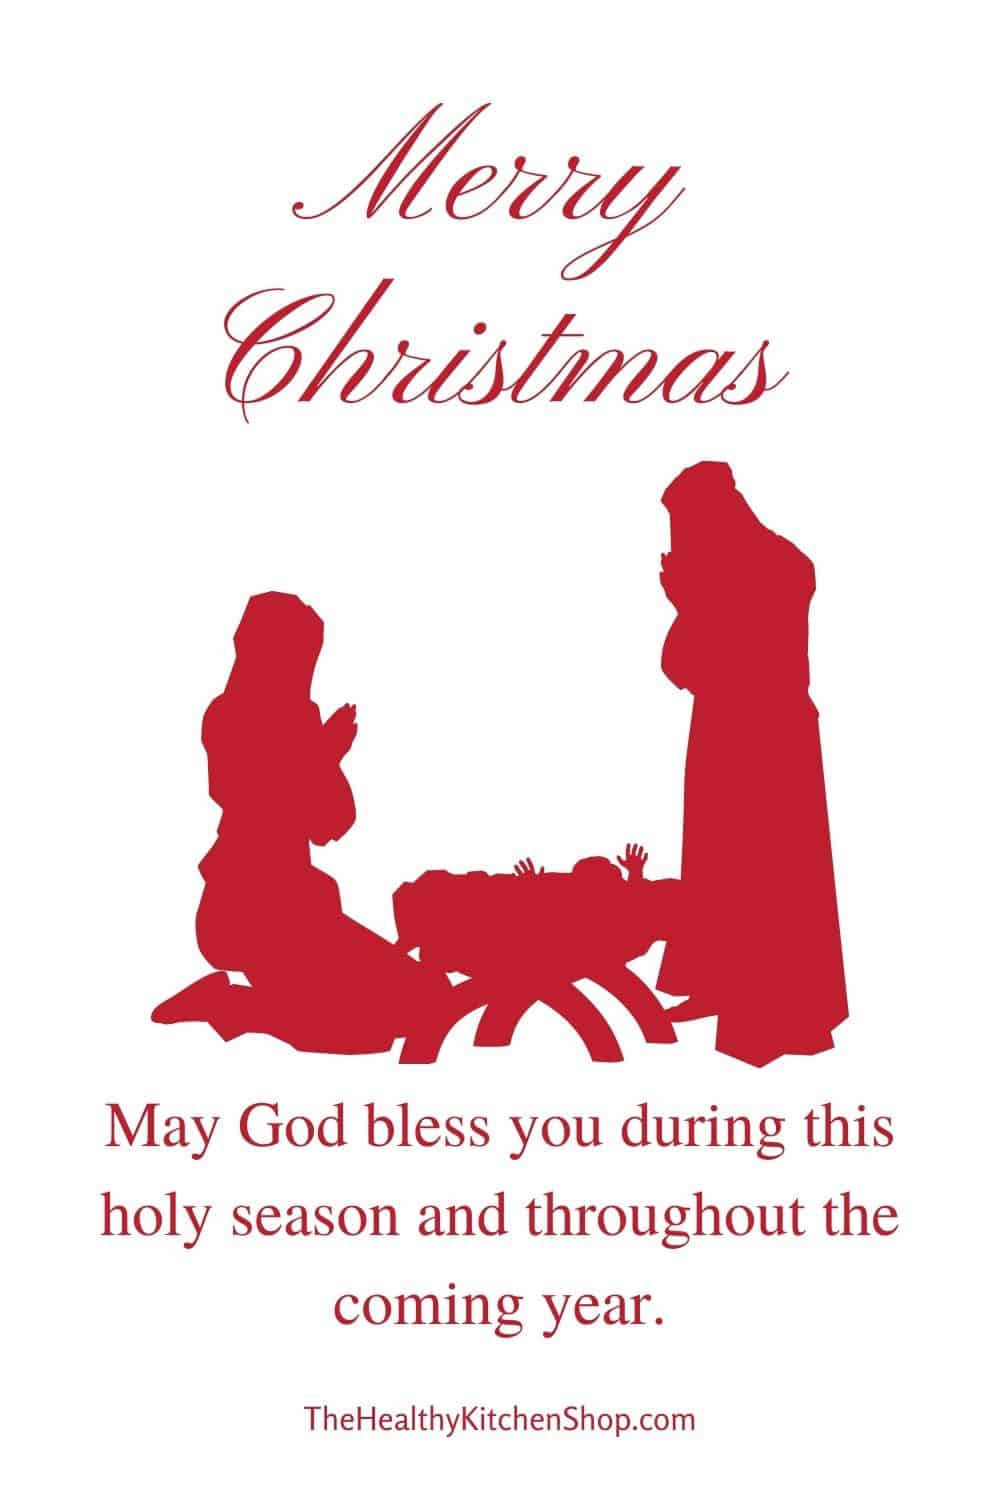 Merry Christmas from TheHealthyKitchenShop.com - May God bless you during this holy season and throughout the year.